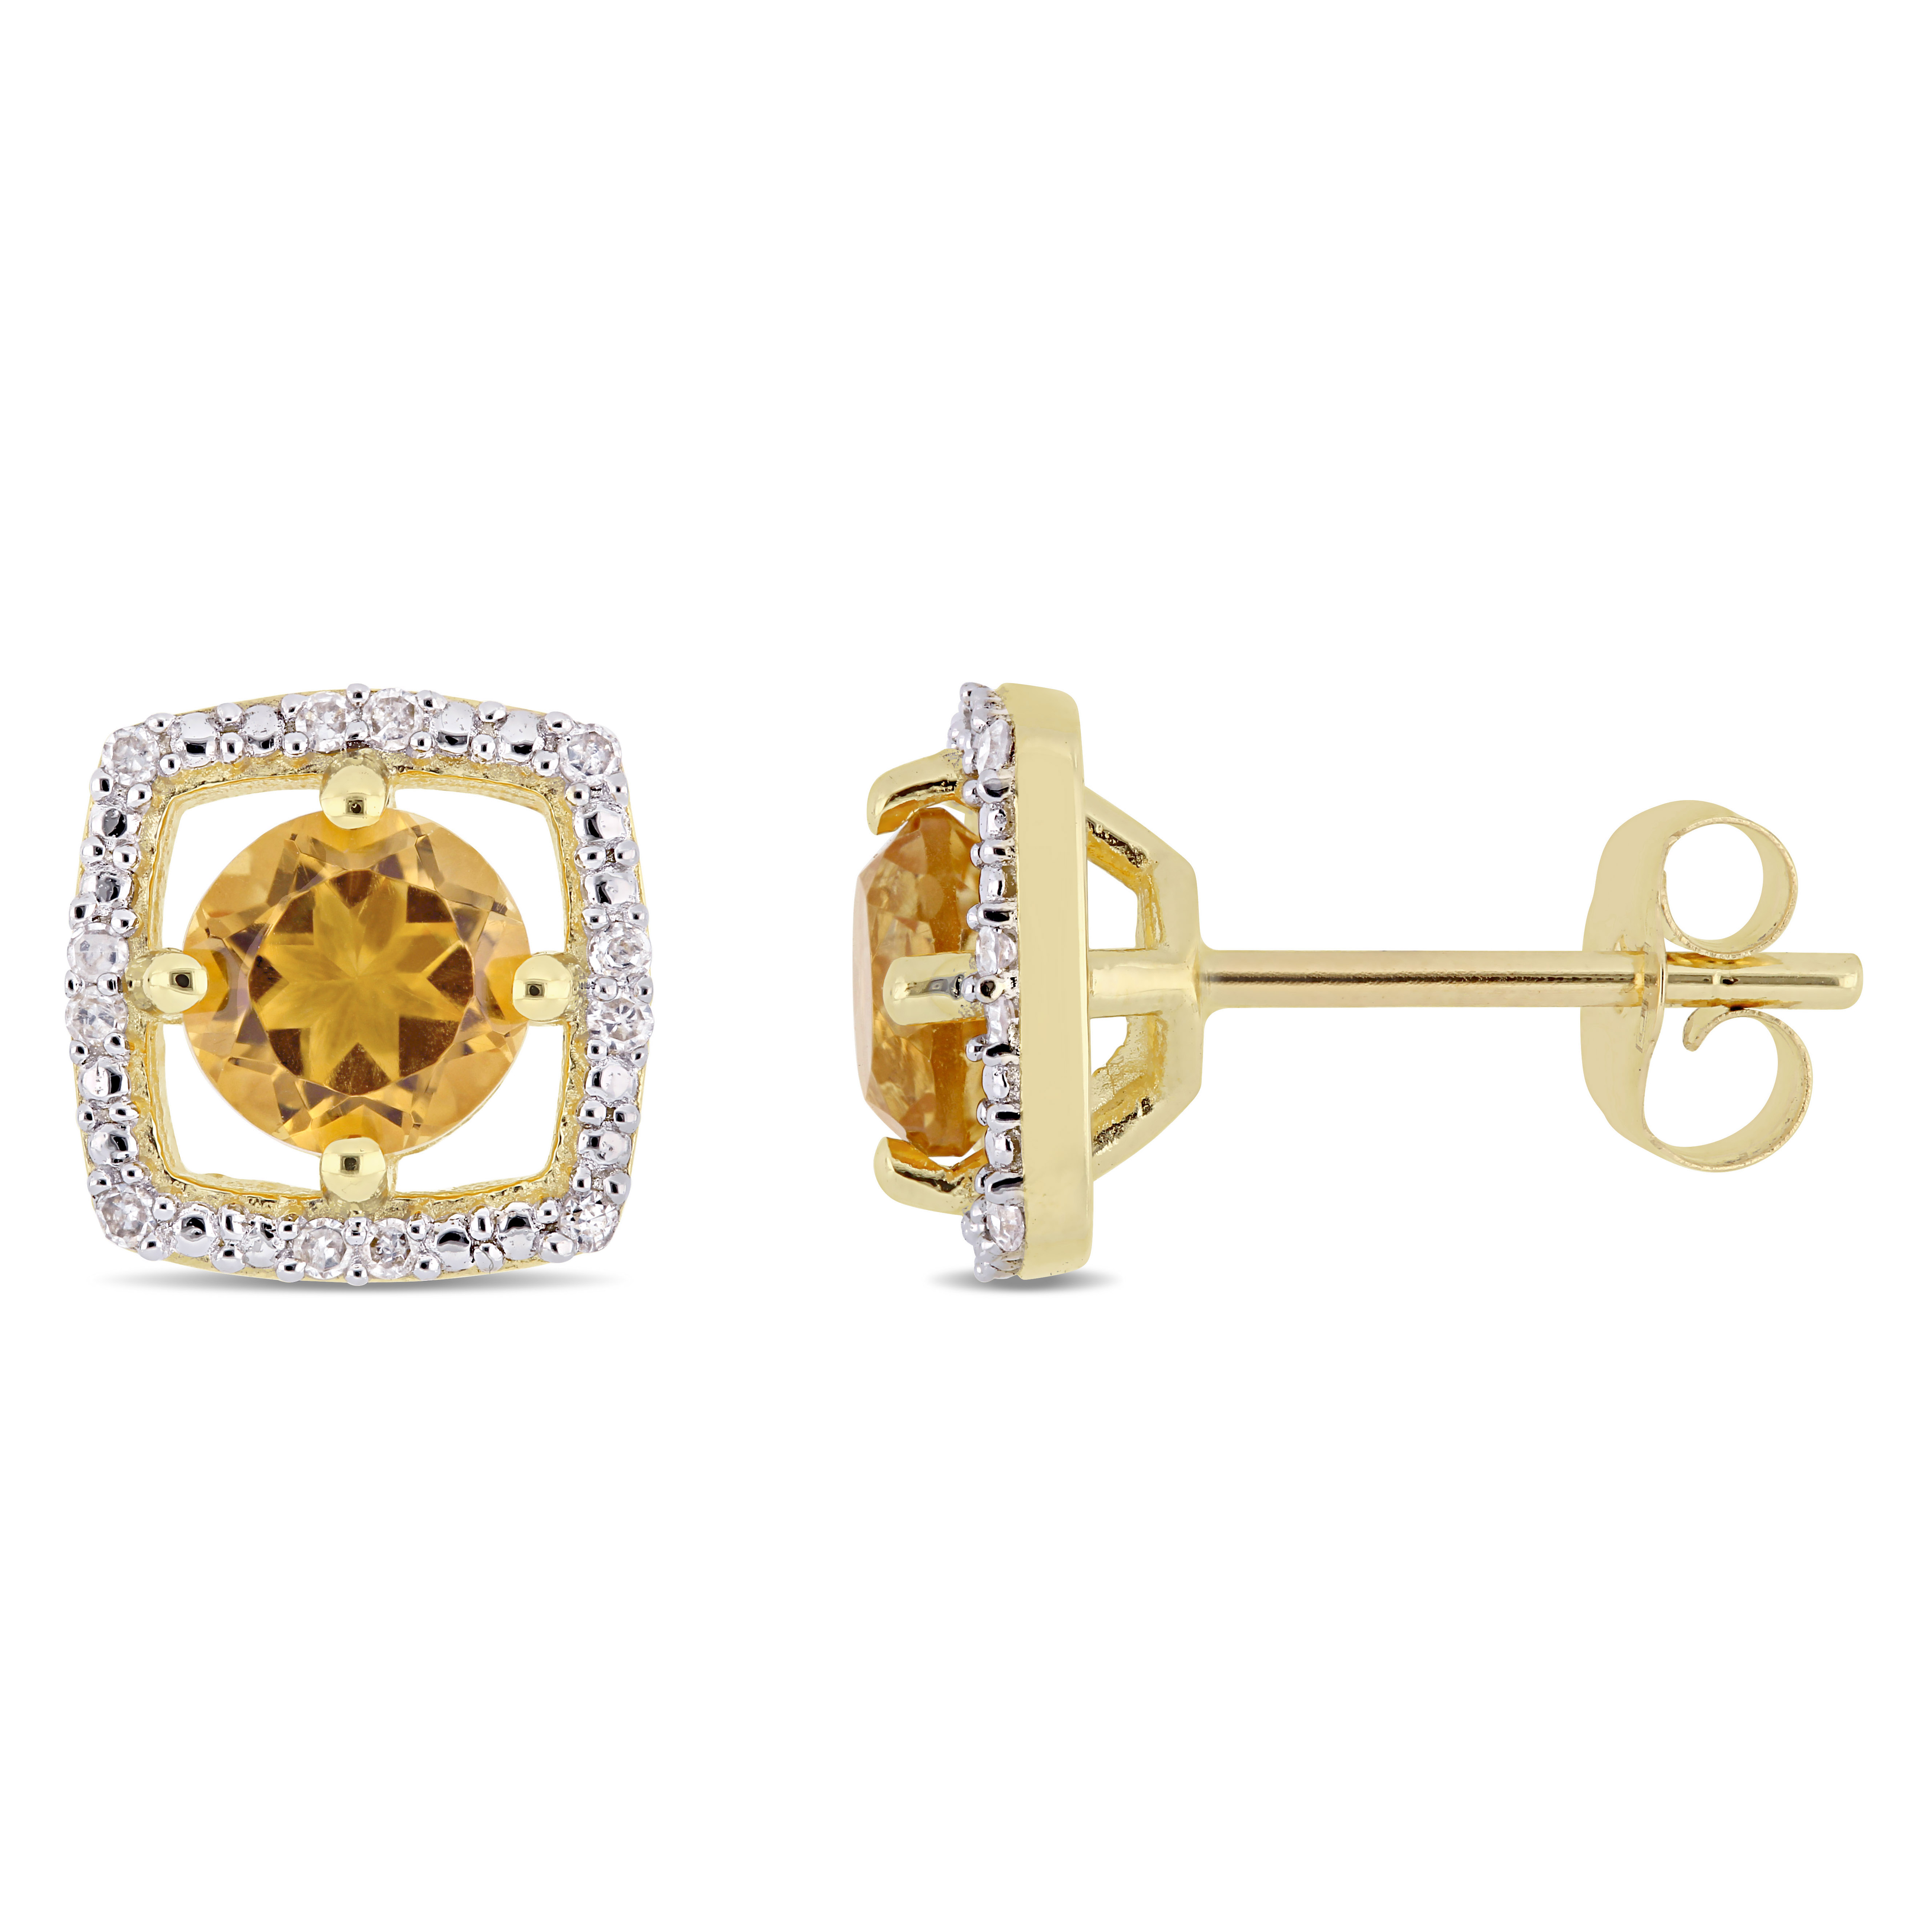 7/8 CT TGW Citrine and Diamond Halo Square Stud Earrings in 10k Yellow Gold